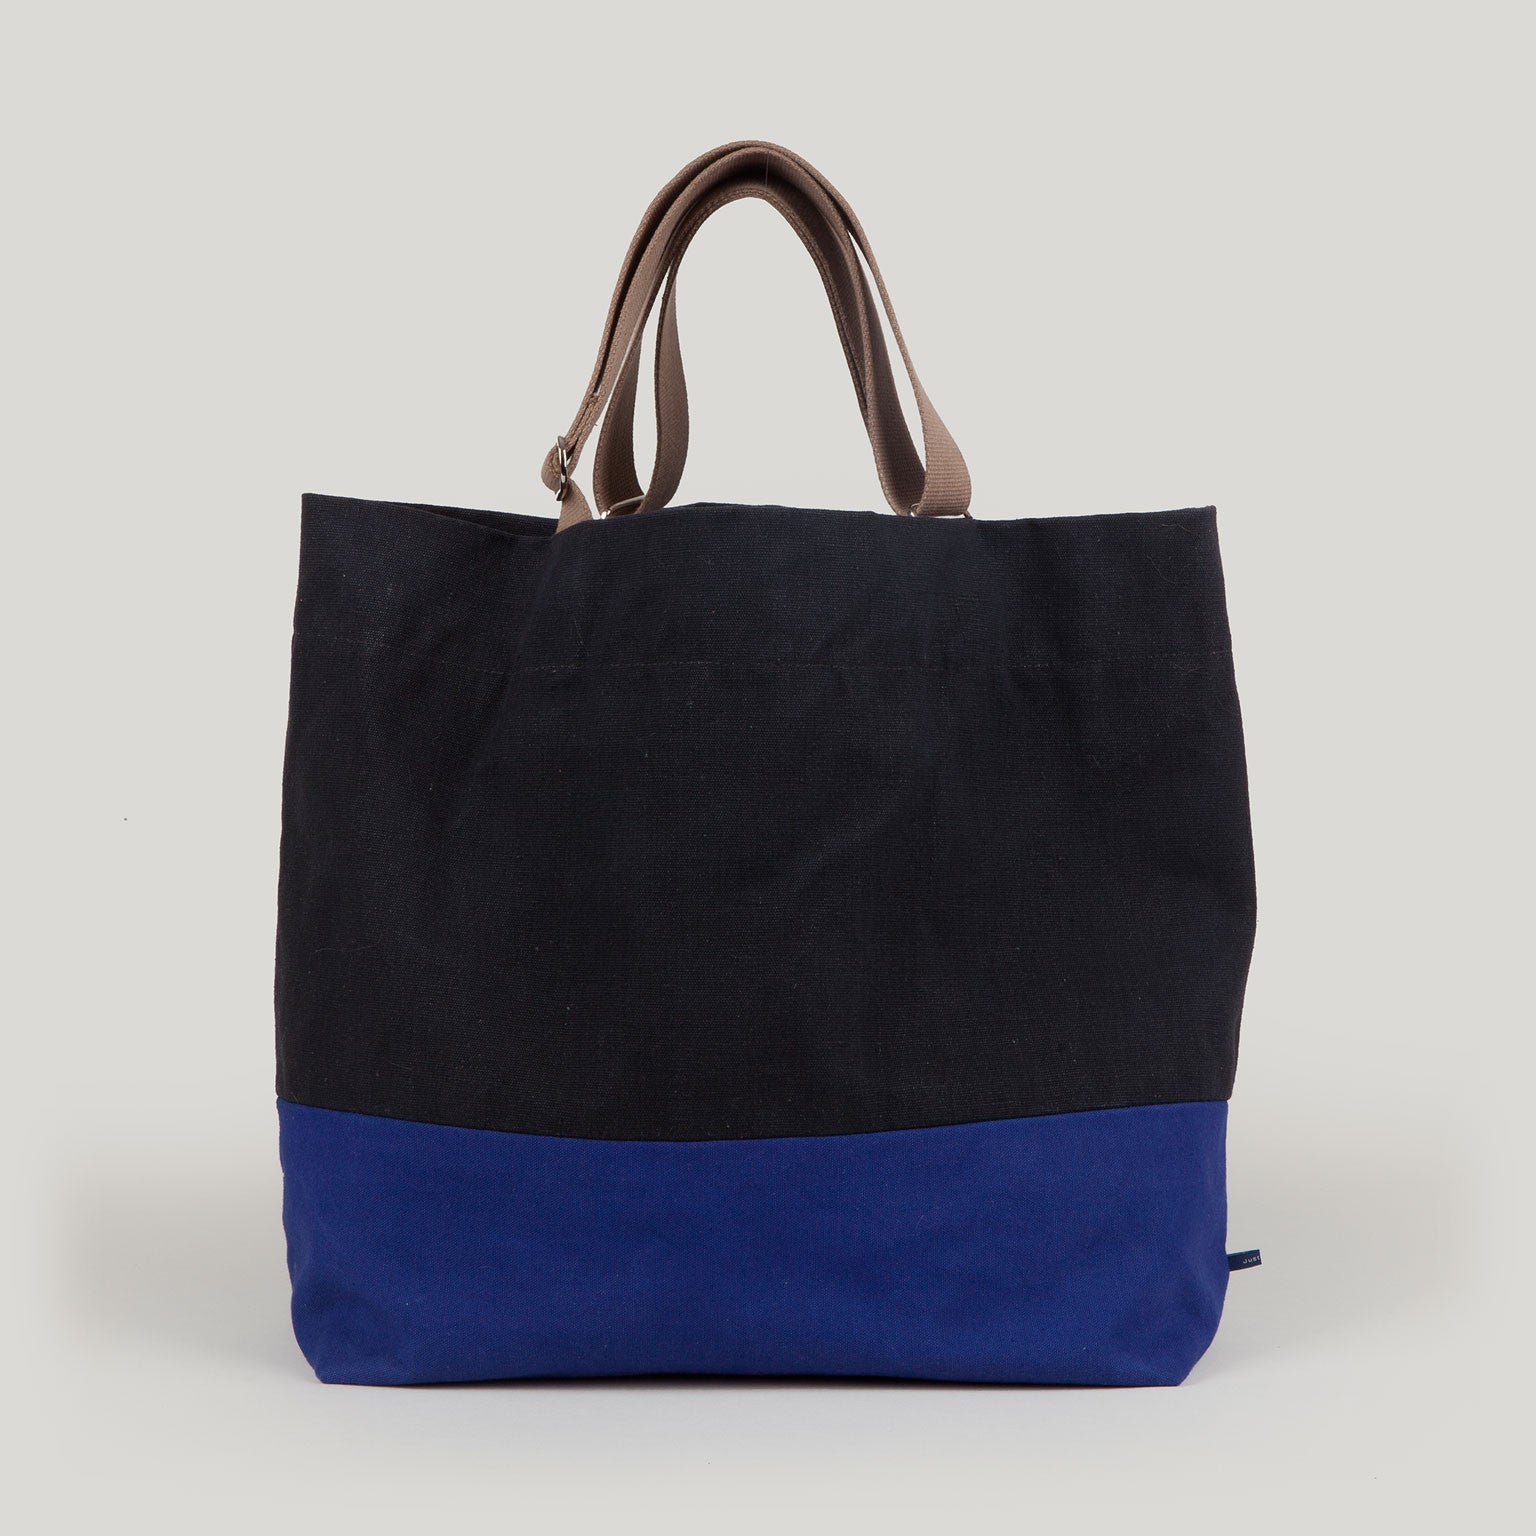 FRIDA <br/> Waxed Canvas Tote <br/> Black & Azure